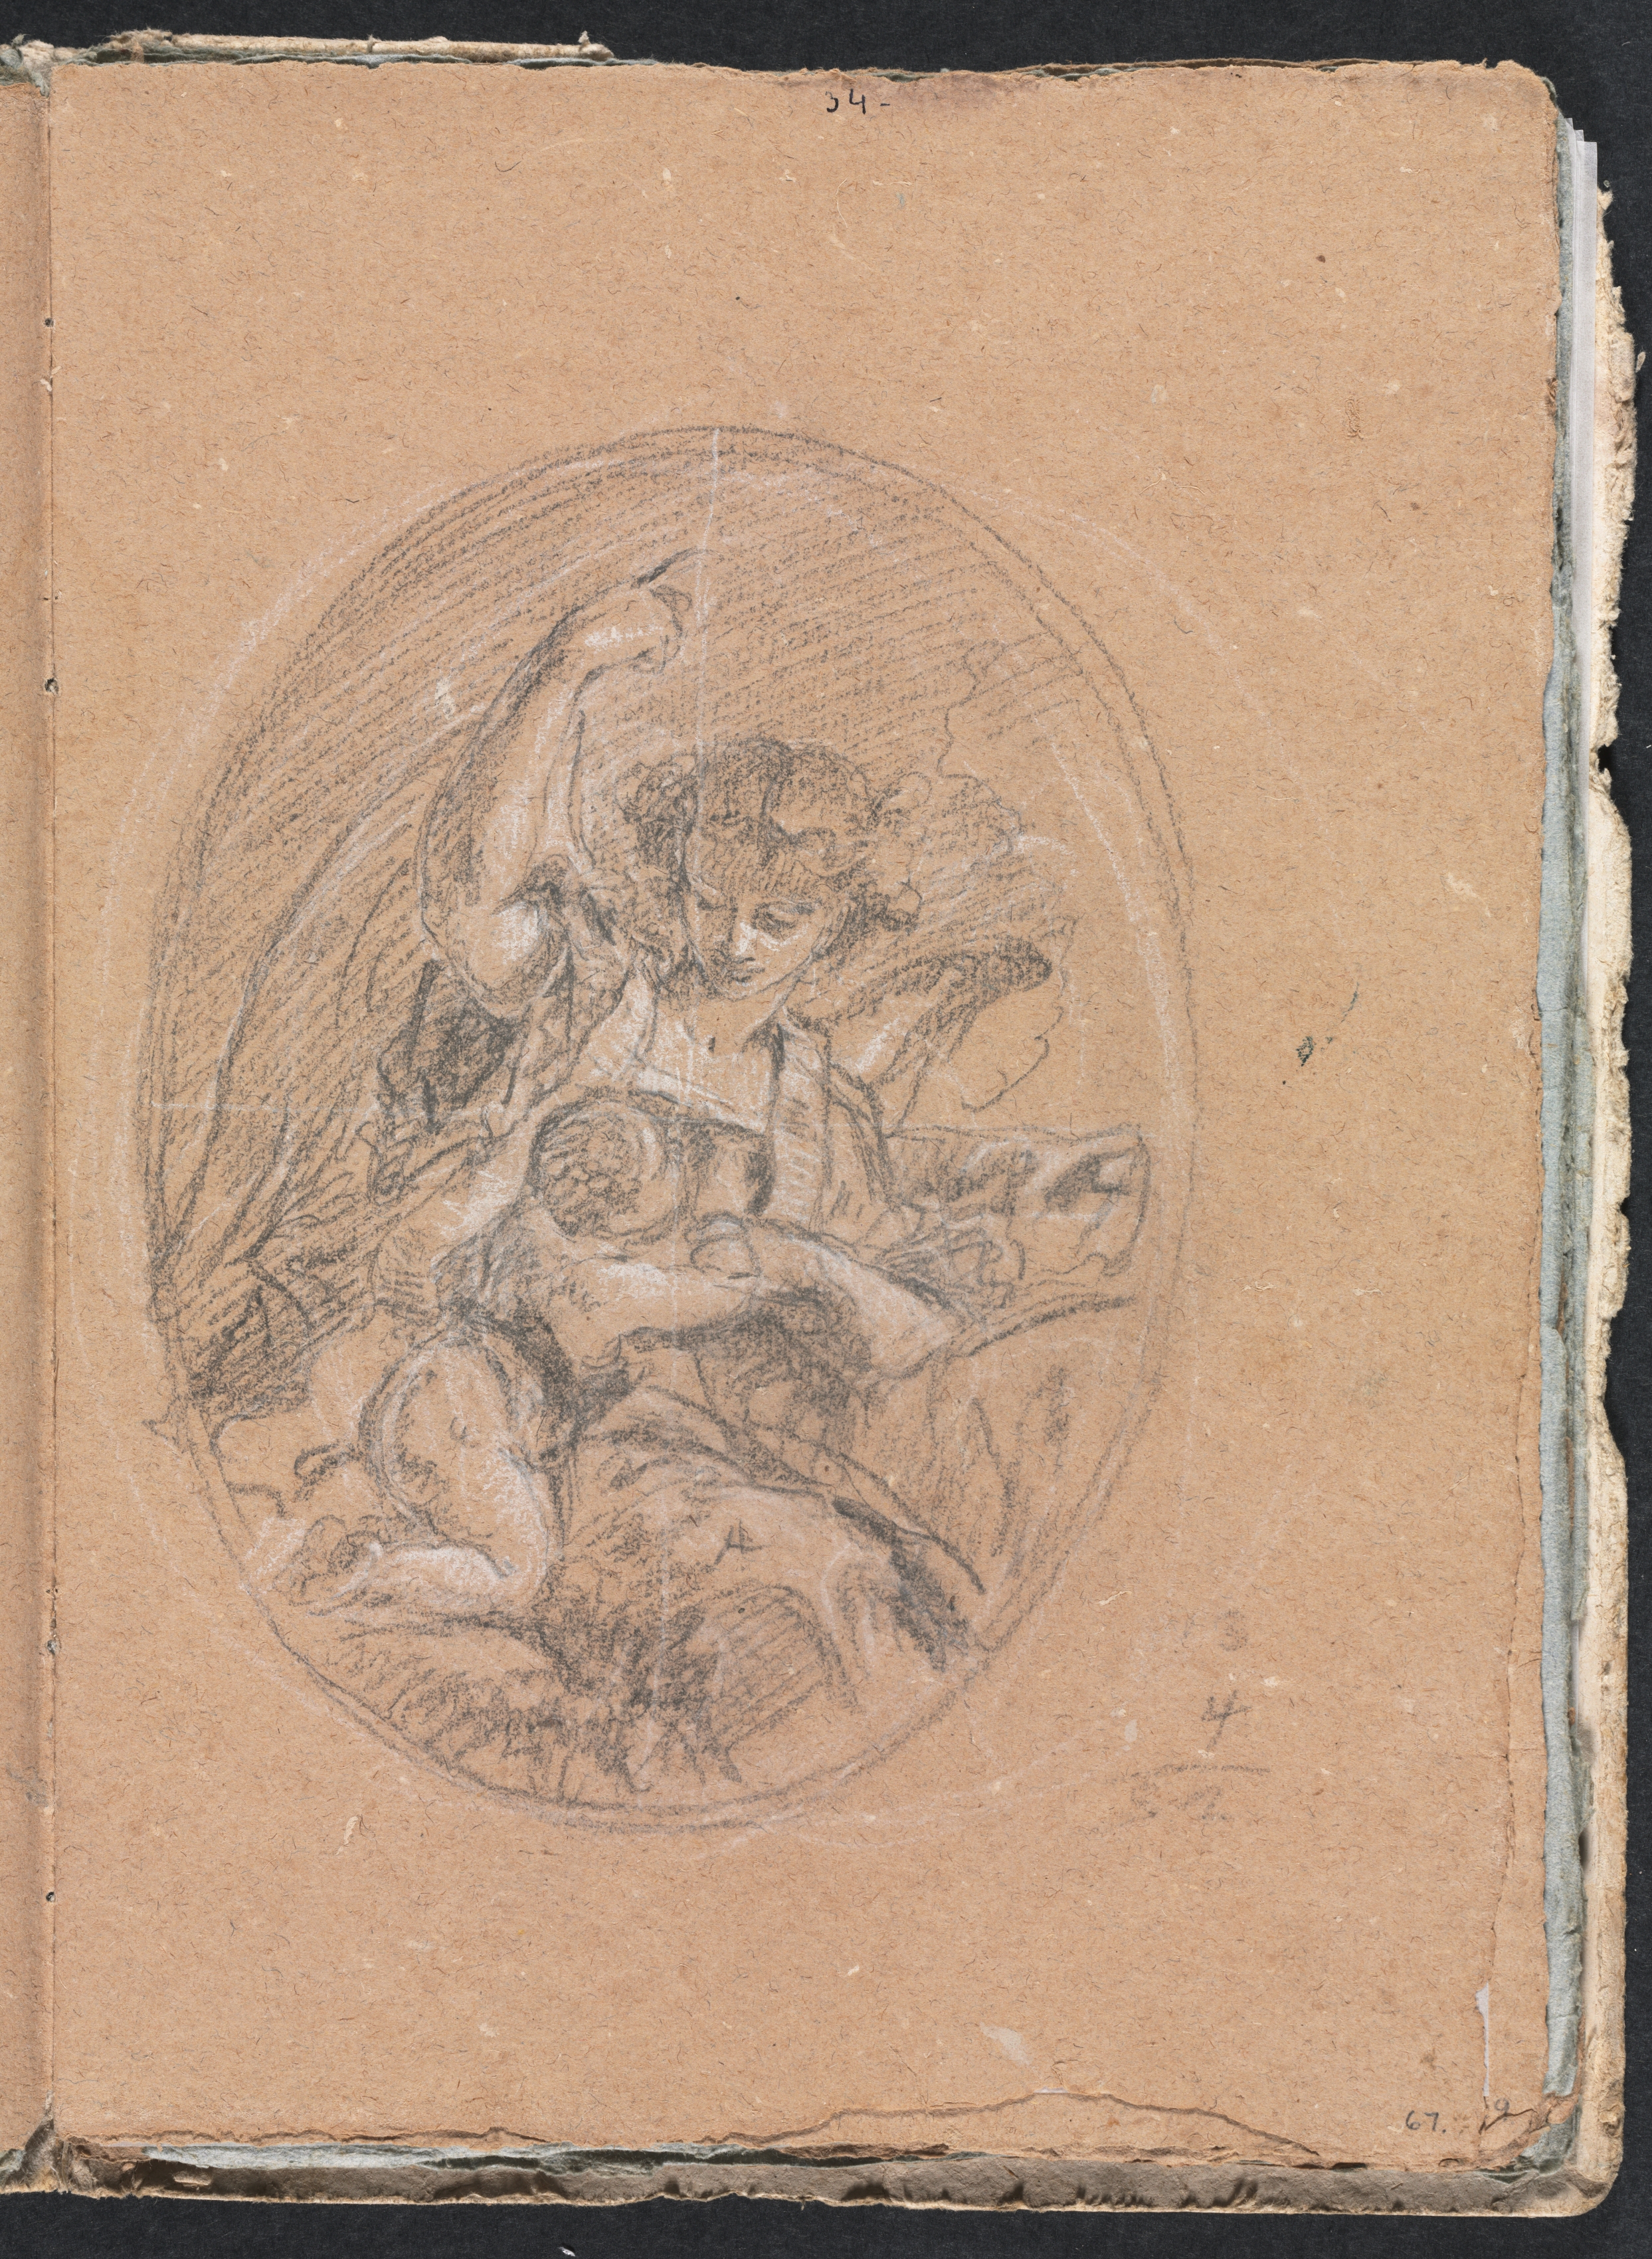 Verona Sketchbook: Figure with child in roundel (page 67)